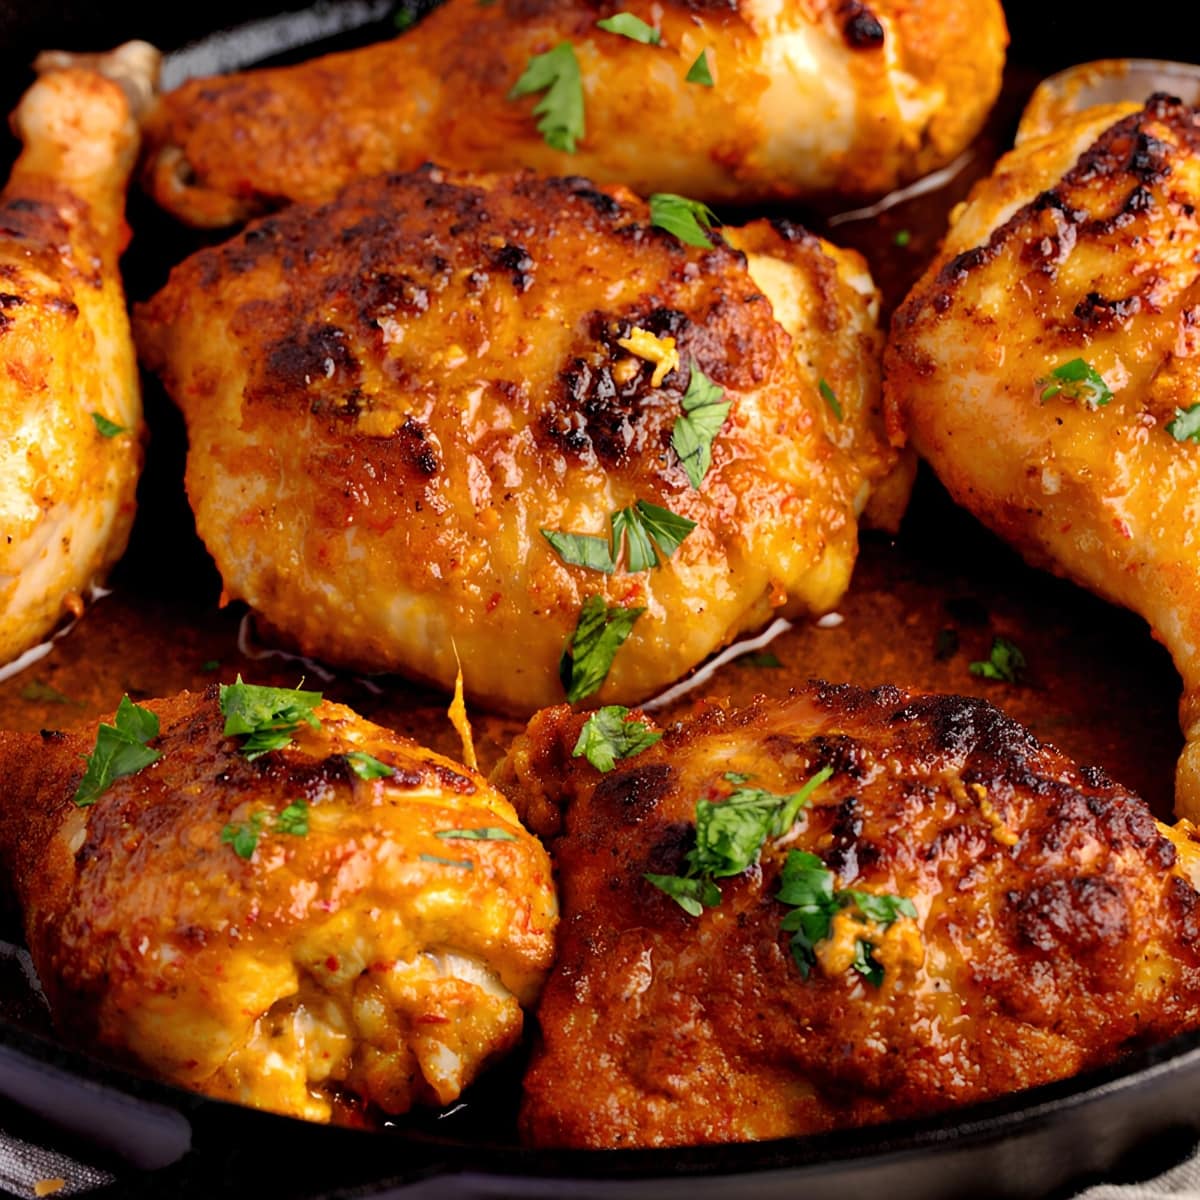 Closeup view of home cooked Peri-peri chicken in a cast iron garnished with herbs.